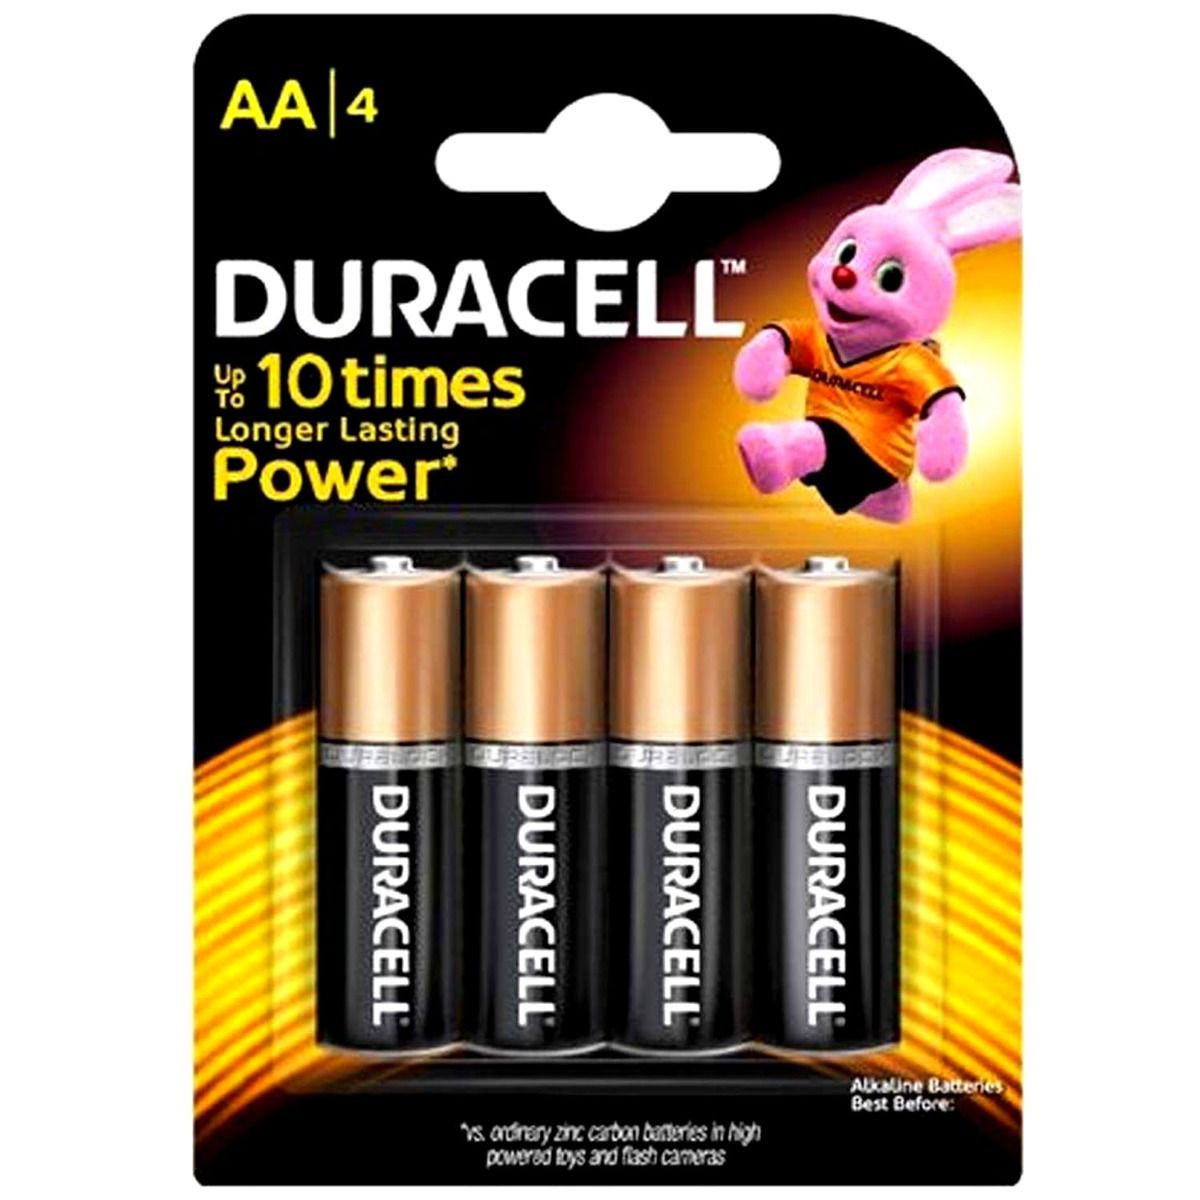 Buy Duracell AA Batteries, 4 Count Online